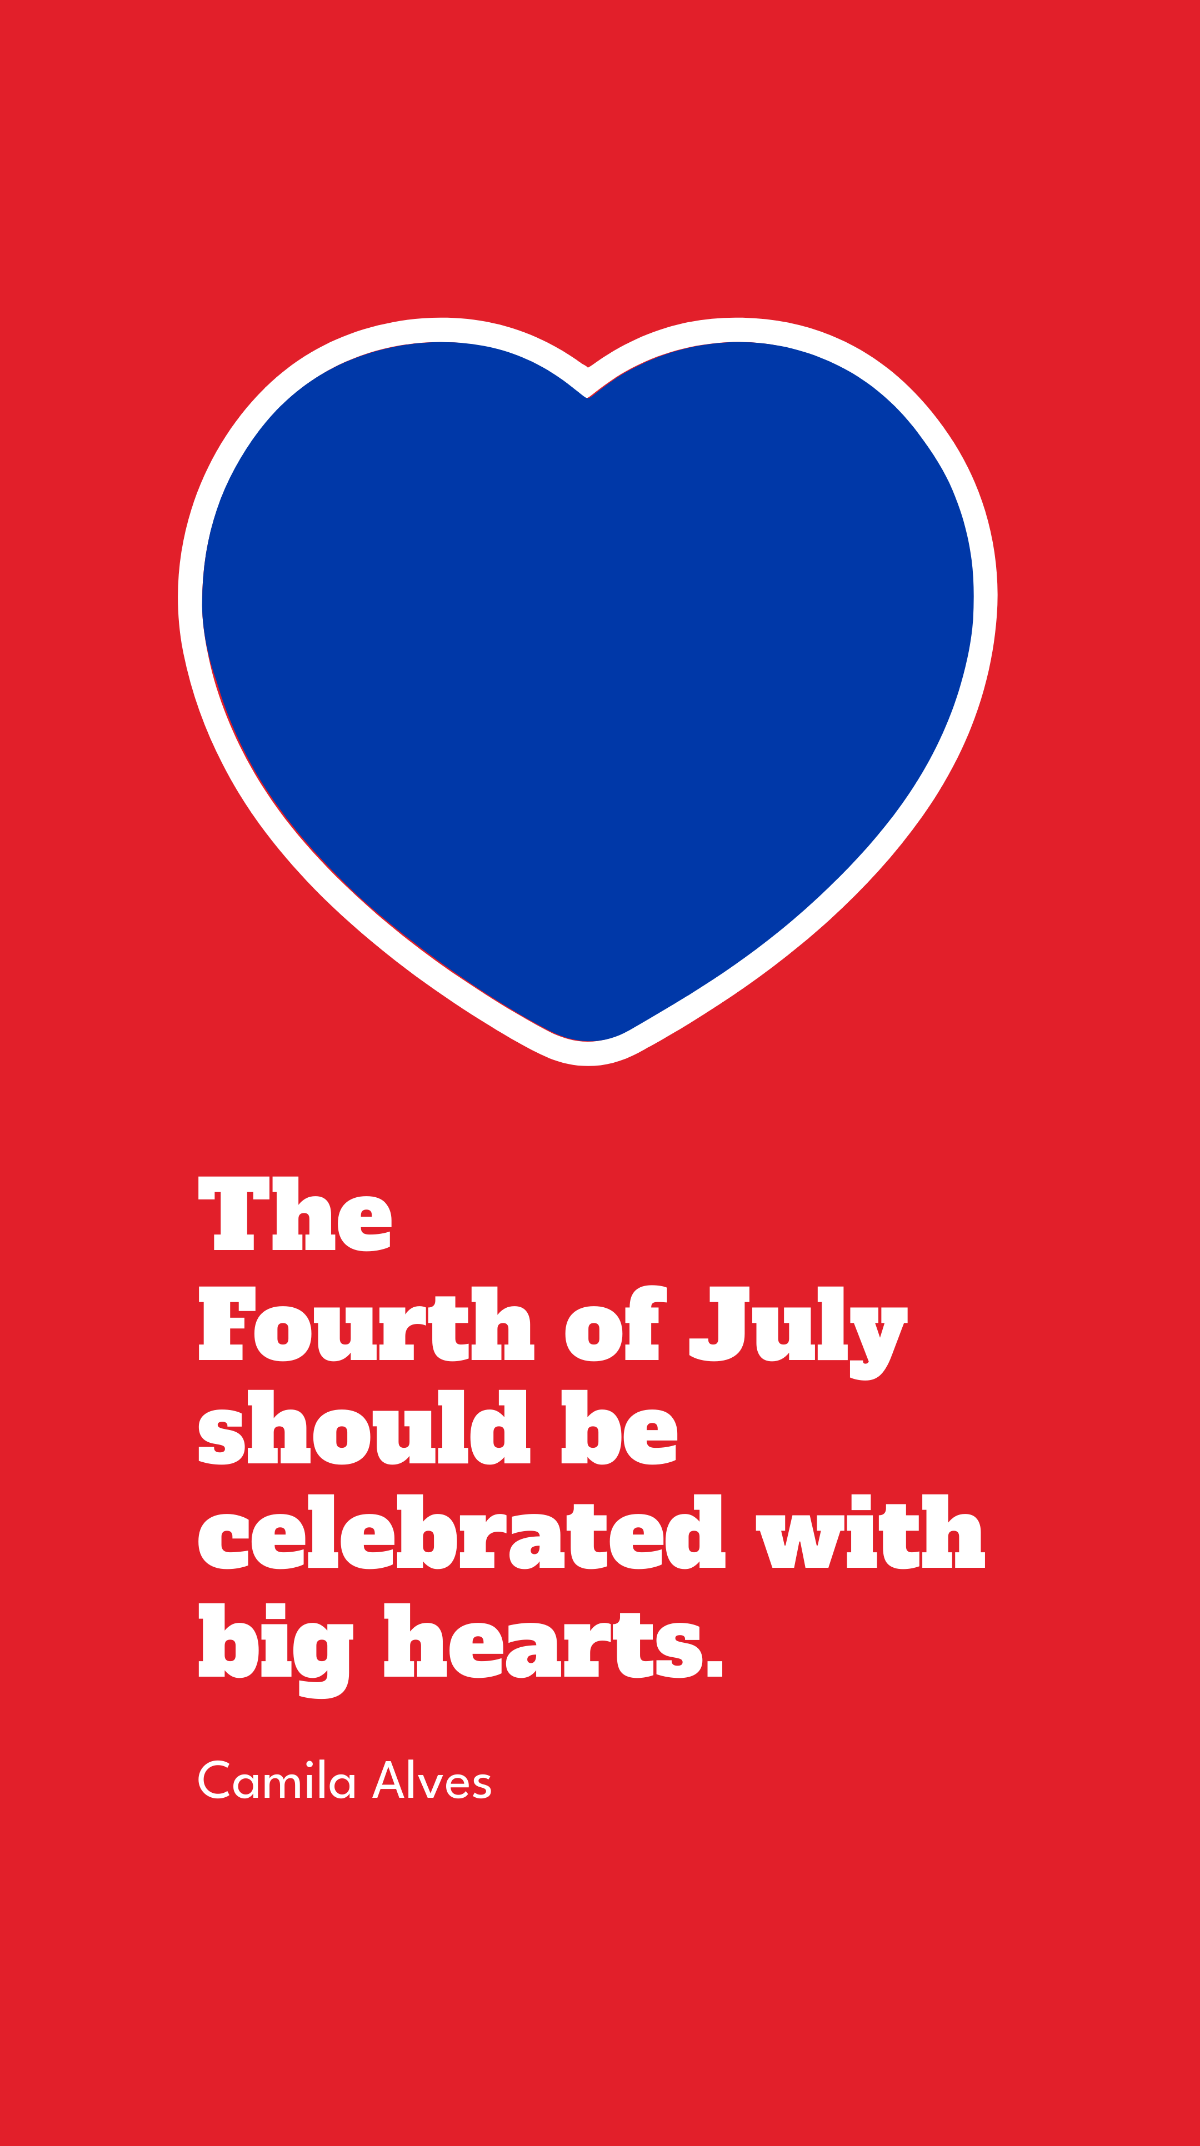 Camila Alves - The Fourth of July should be celebrated with big hearts. Template